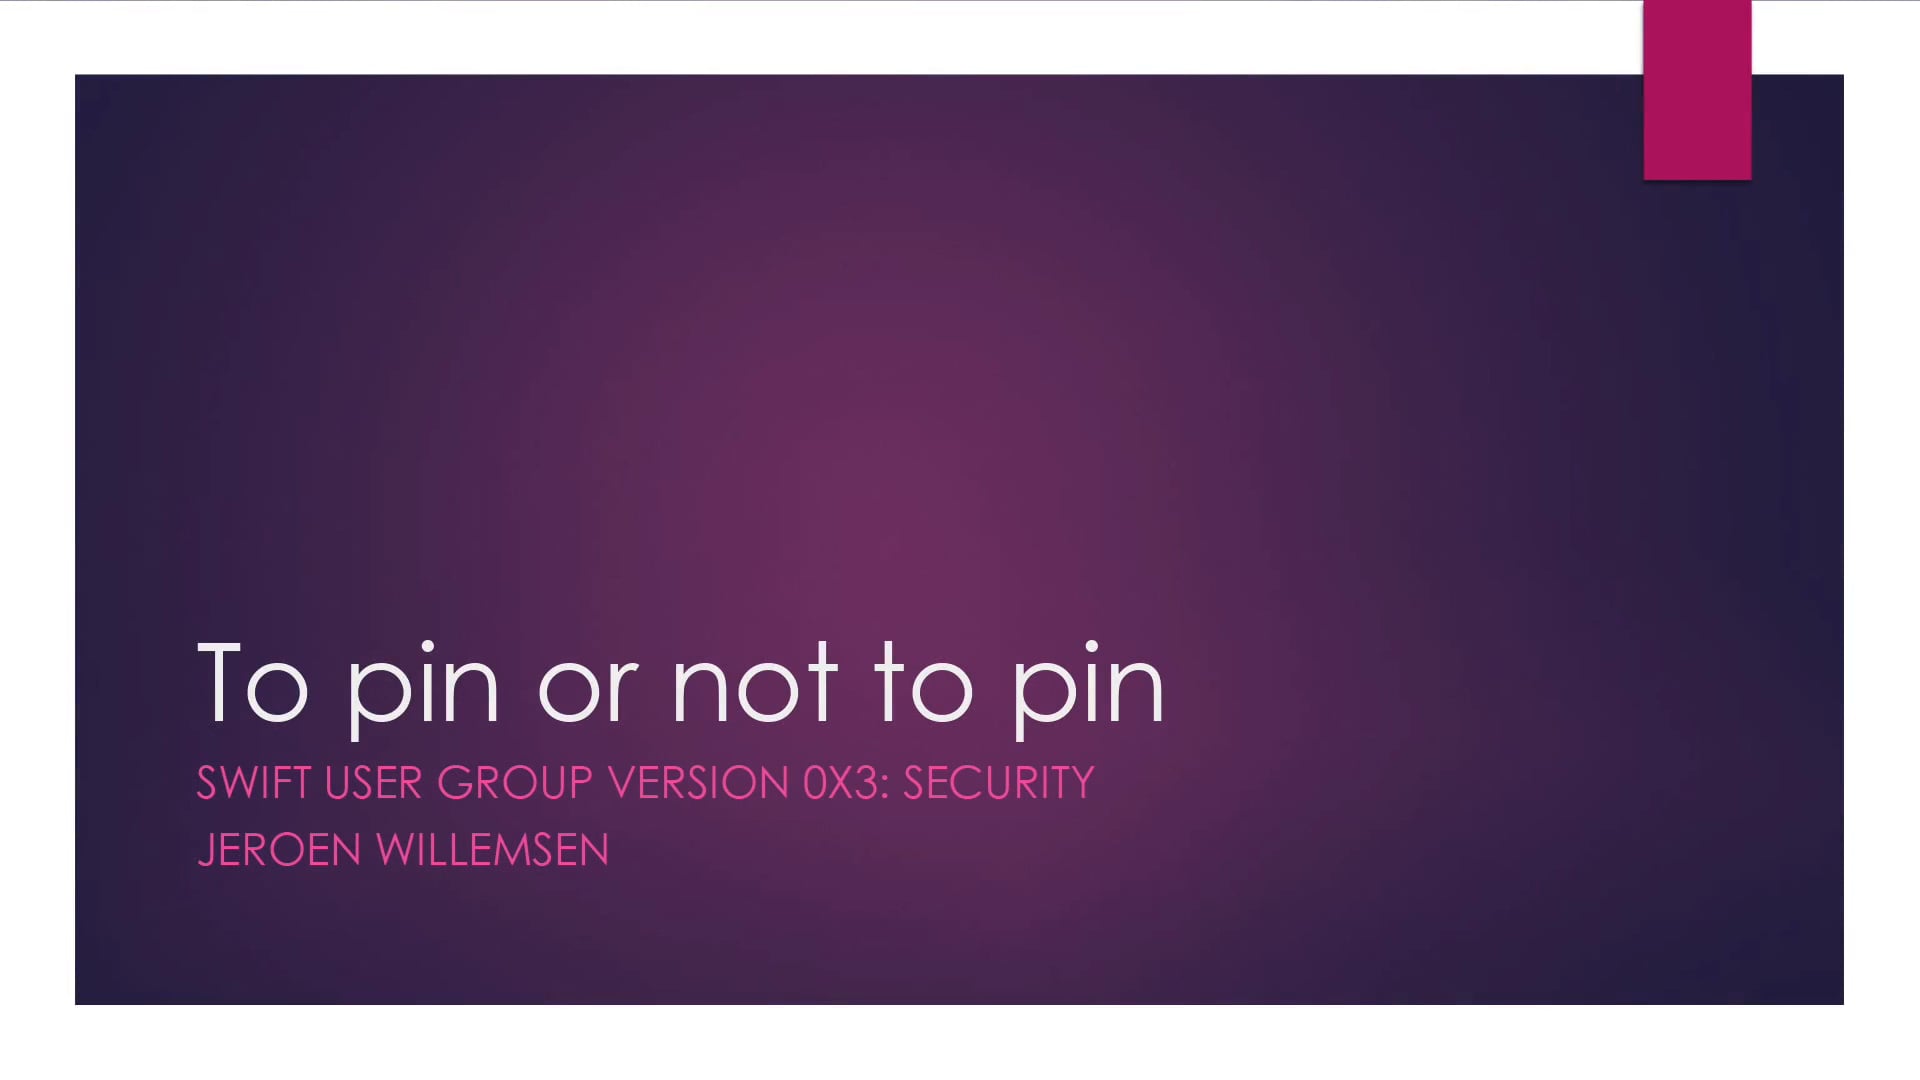 To pin or not to pin